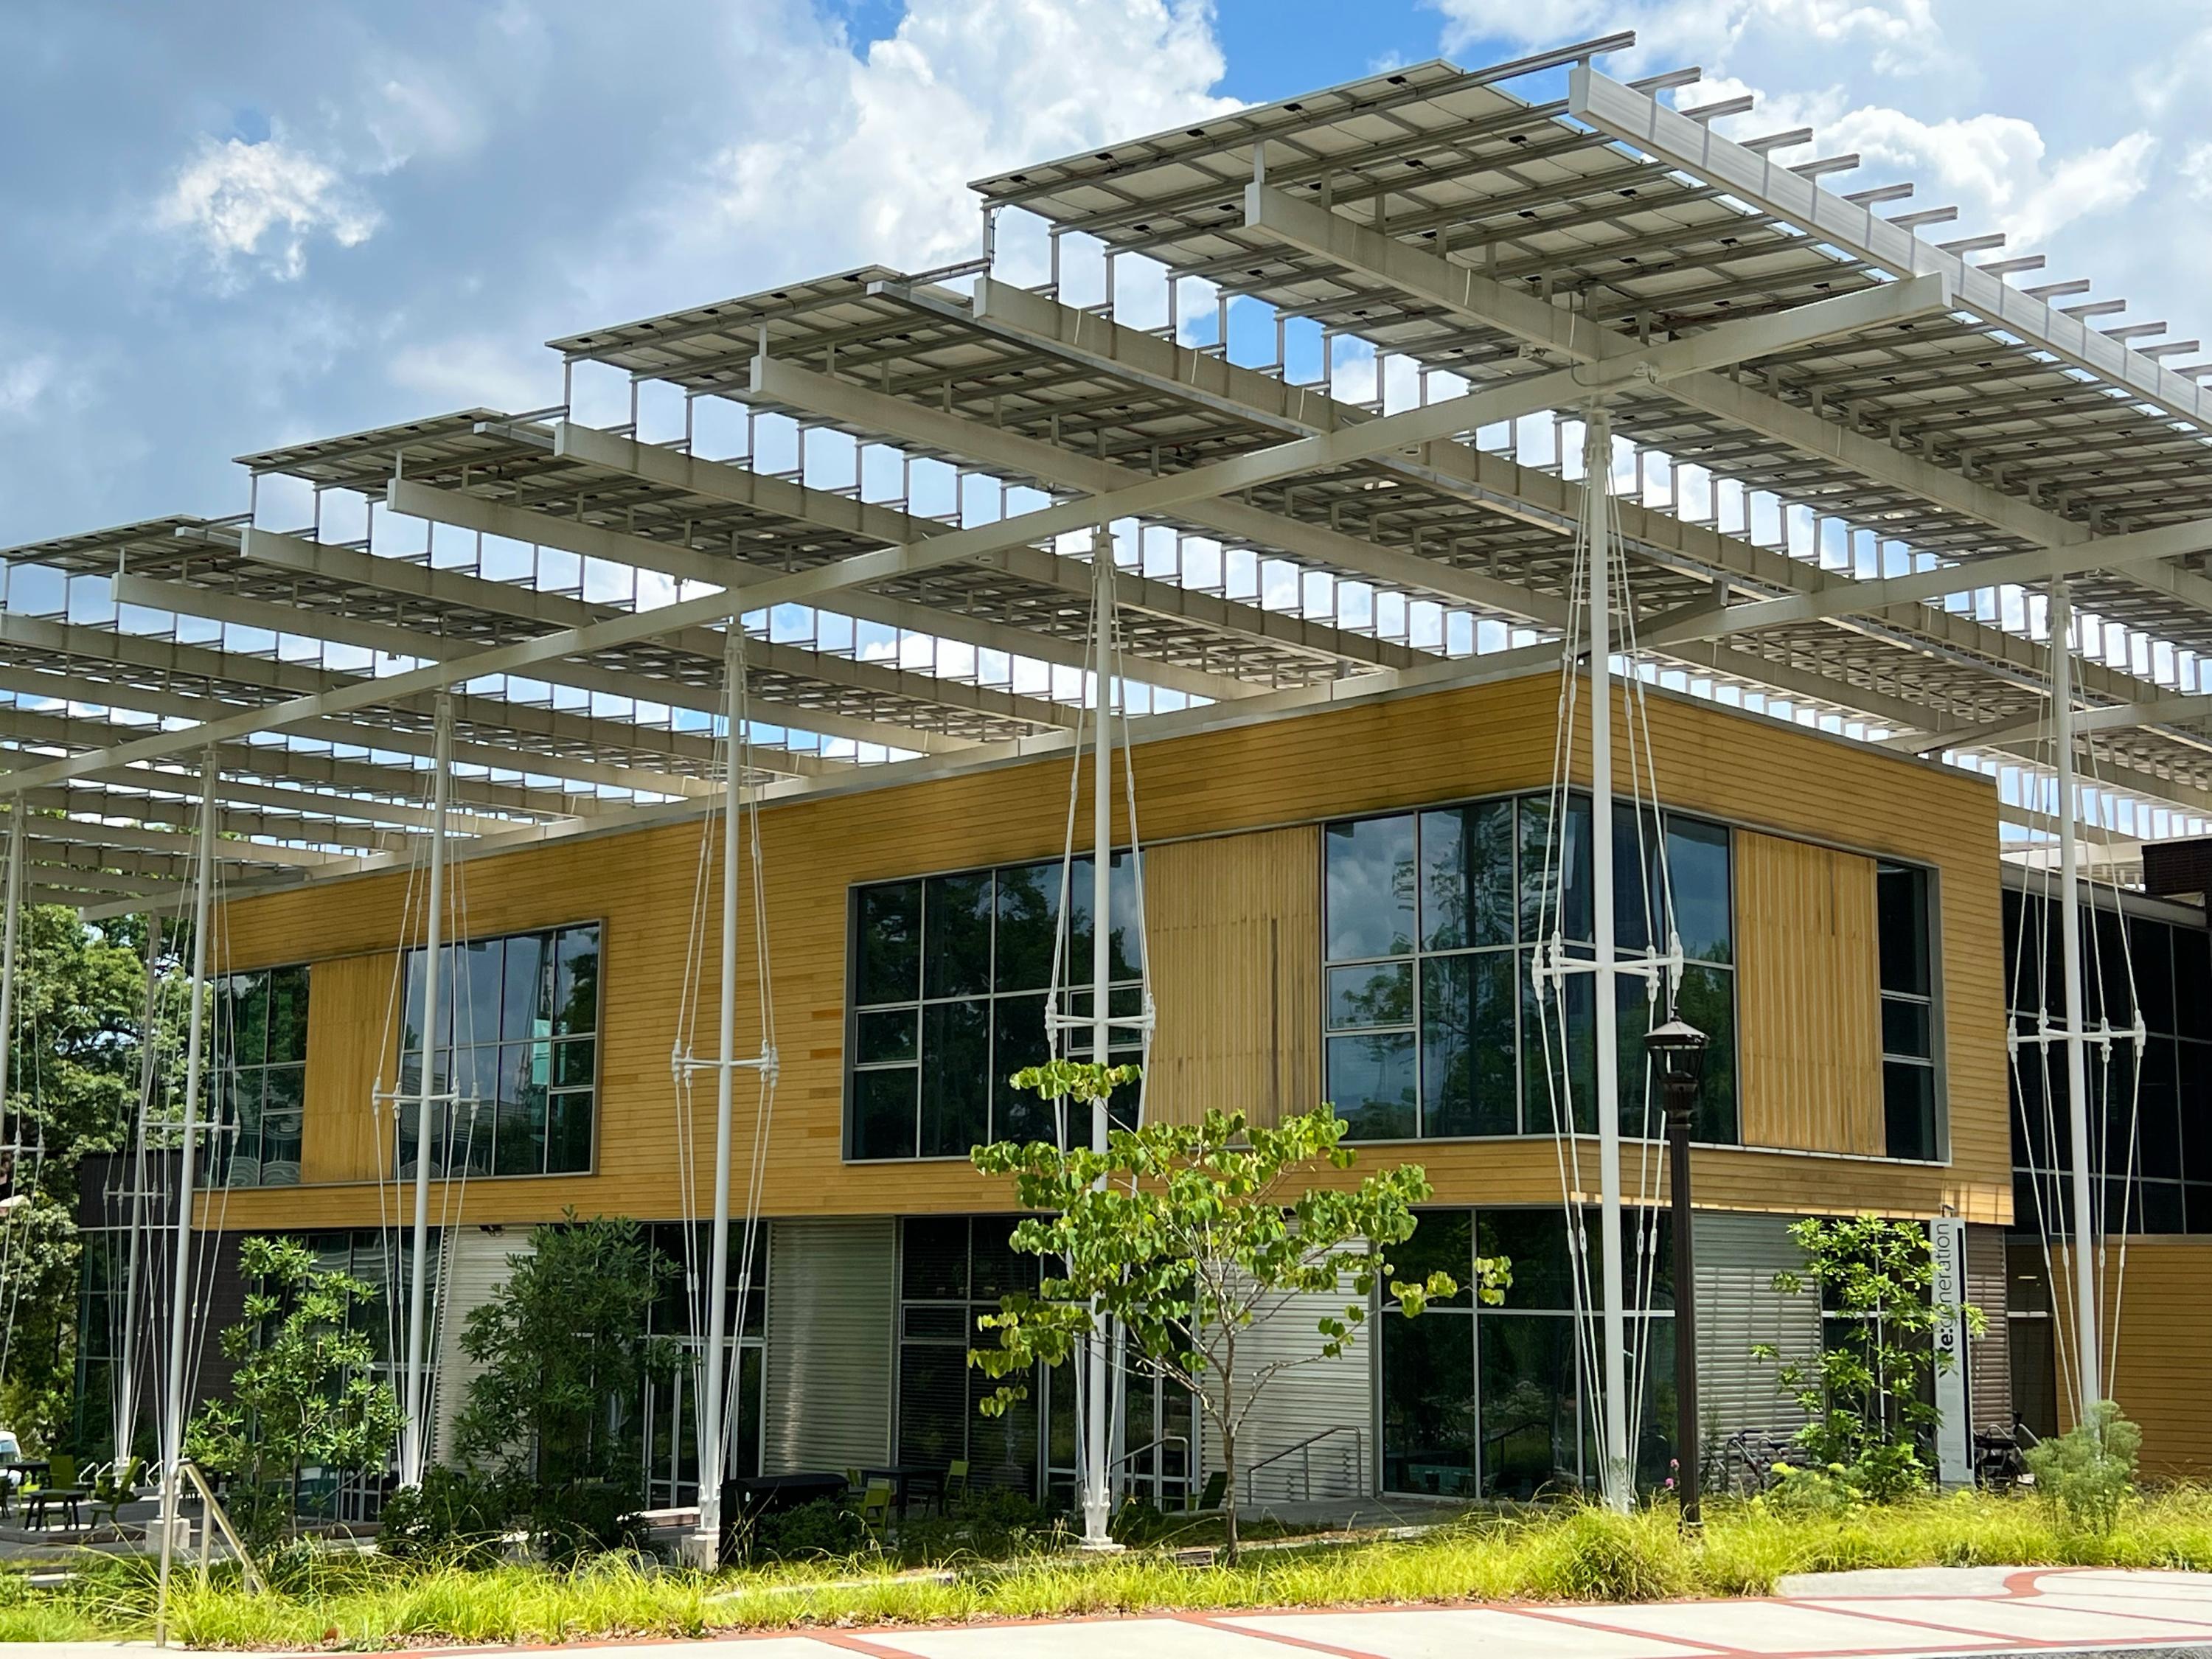 Ecolabels, Innovation, and Green Market Transformation: Learning to LEED